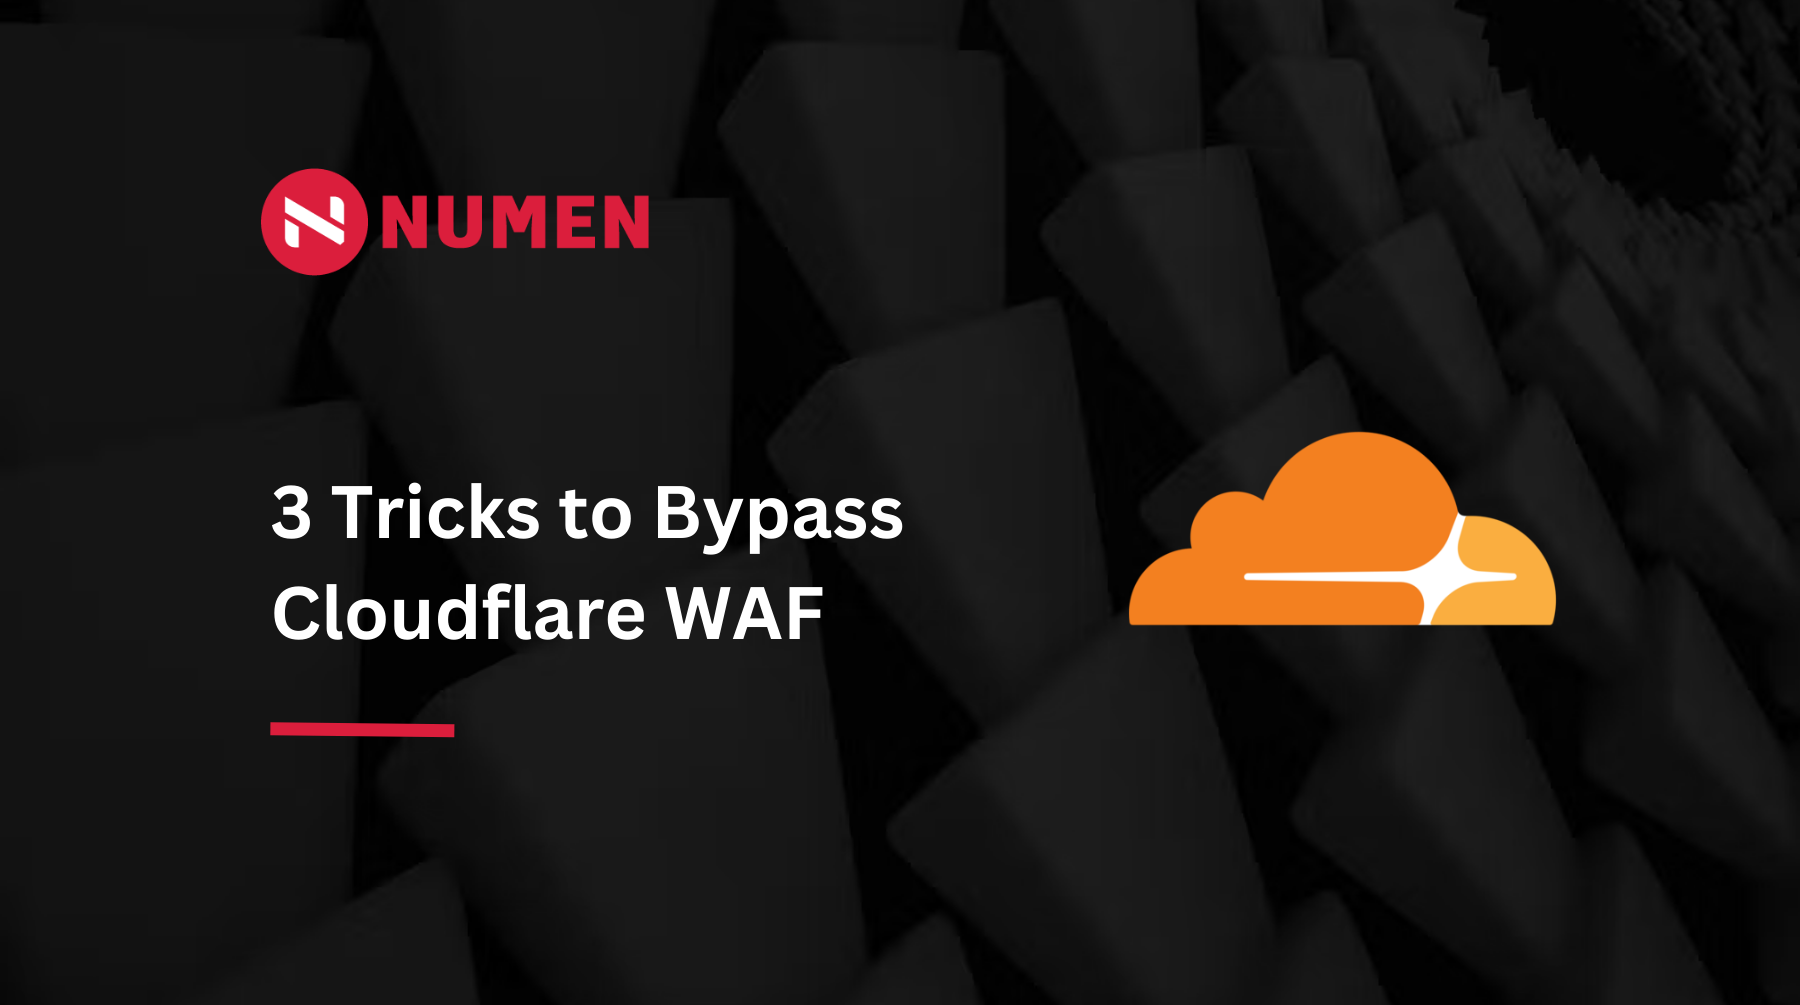 3 Tricks to Bypass Cloudflare WAF graphic